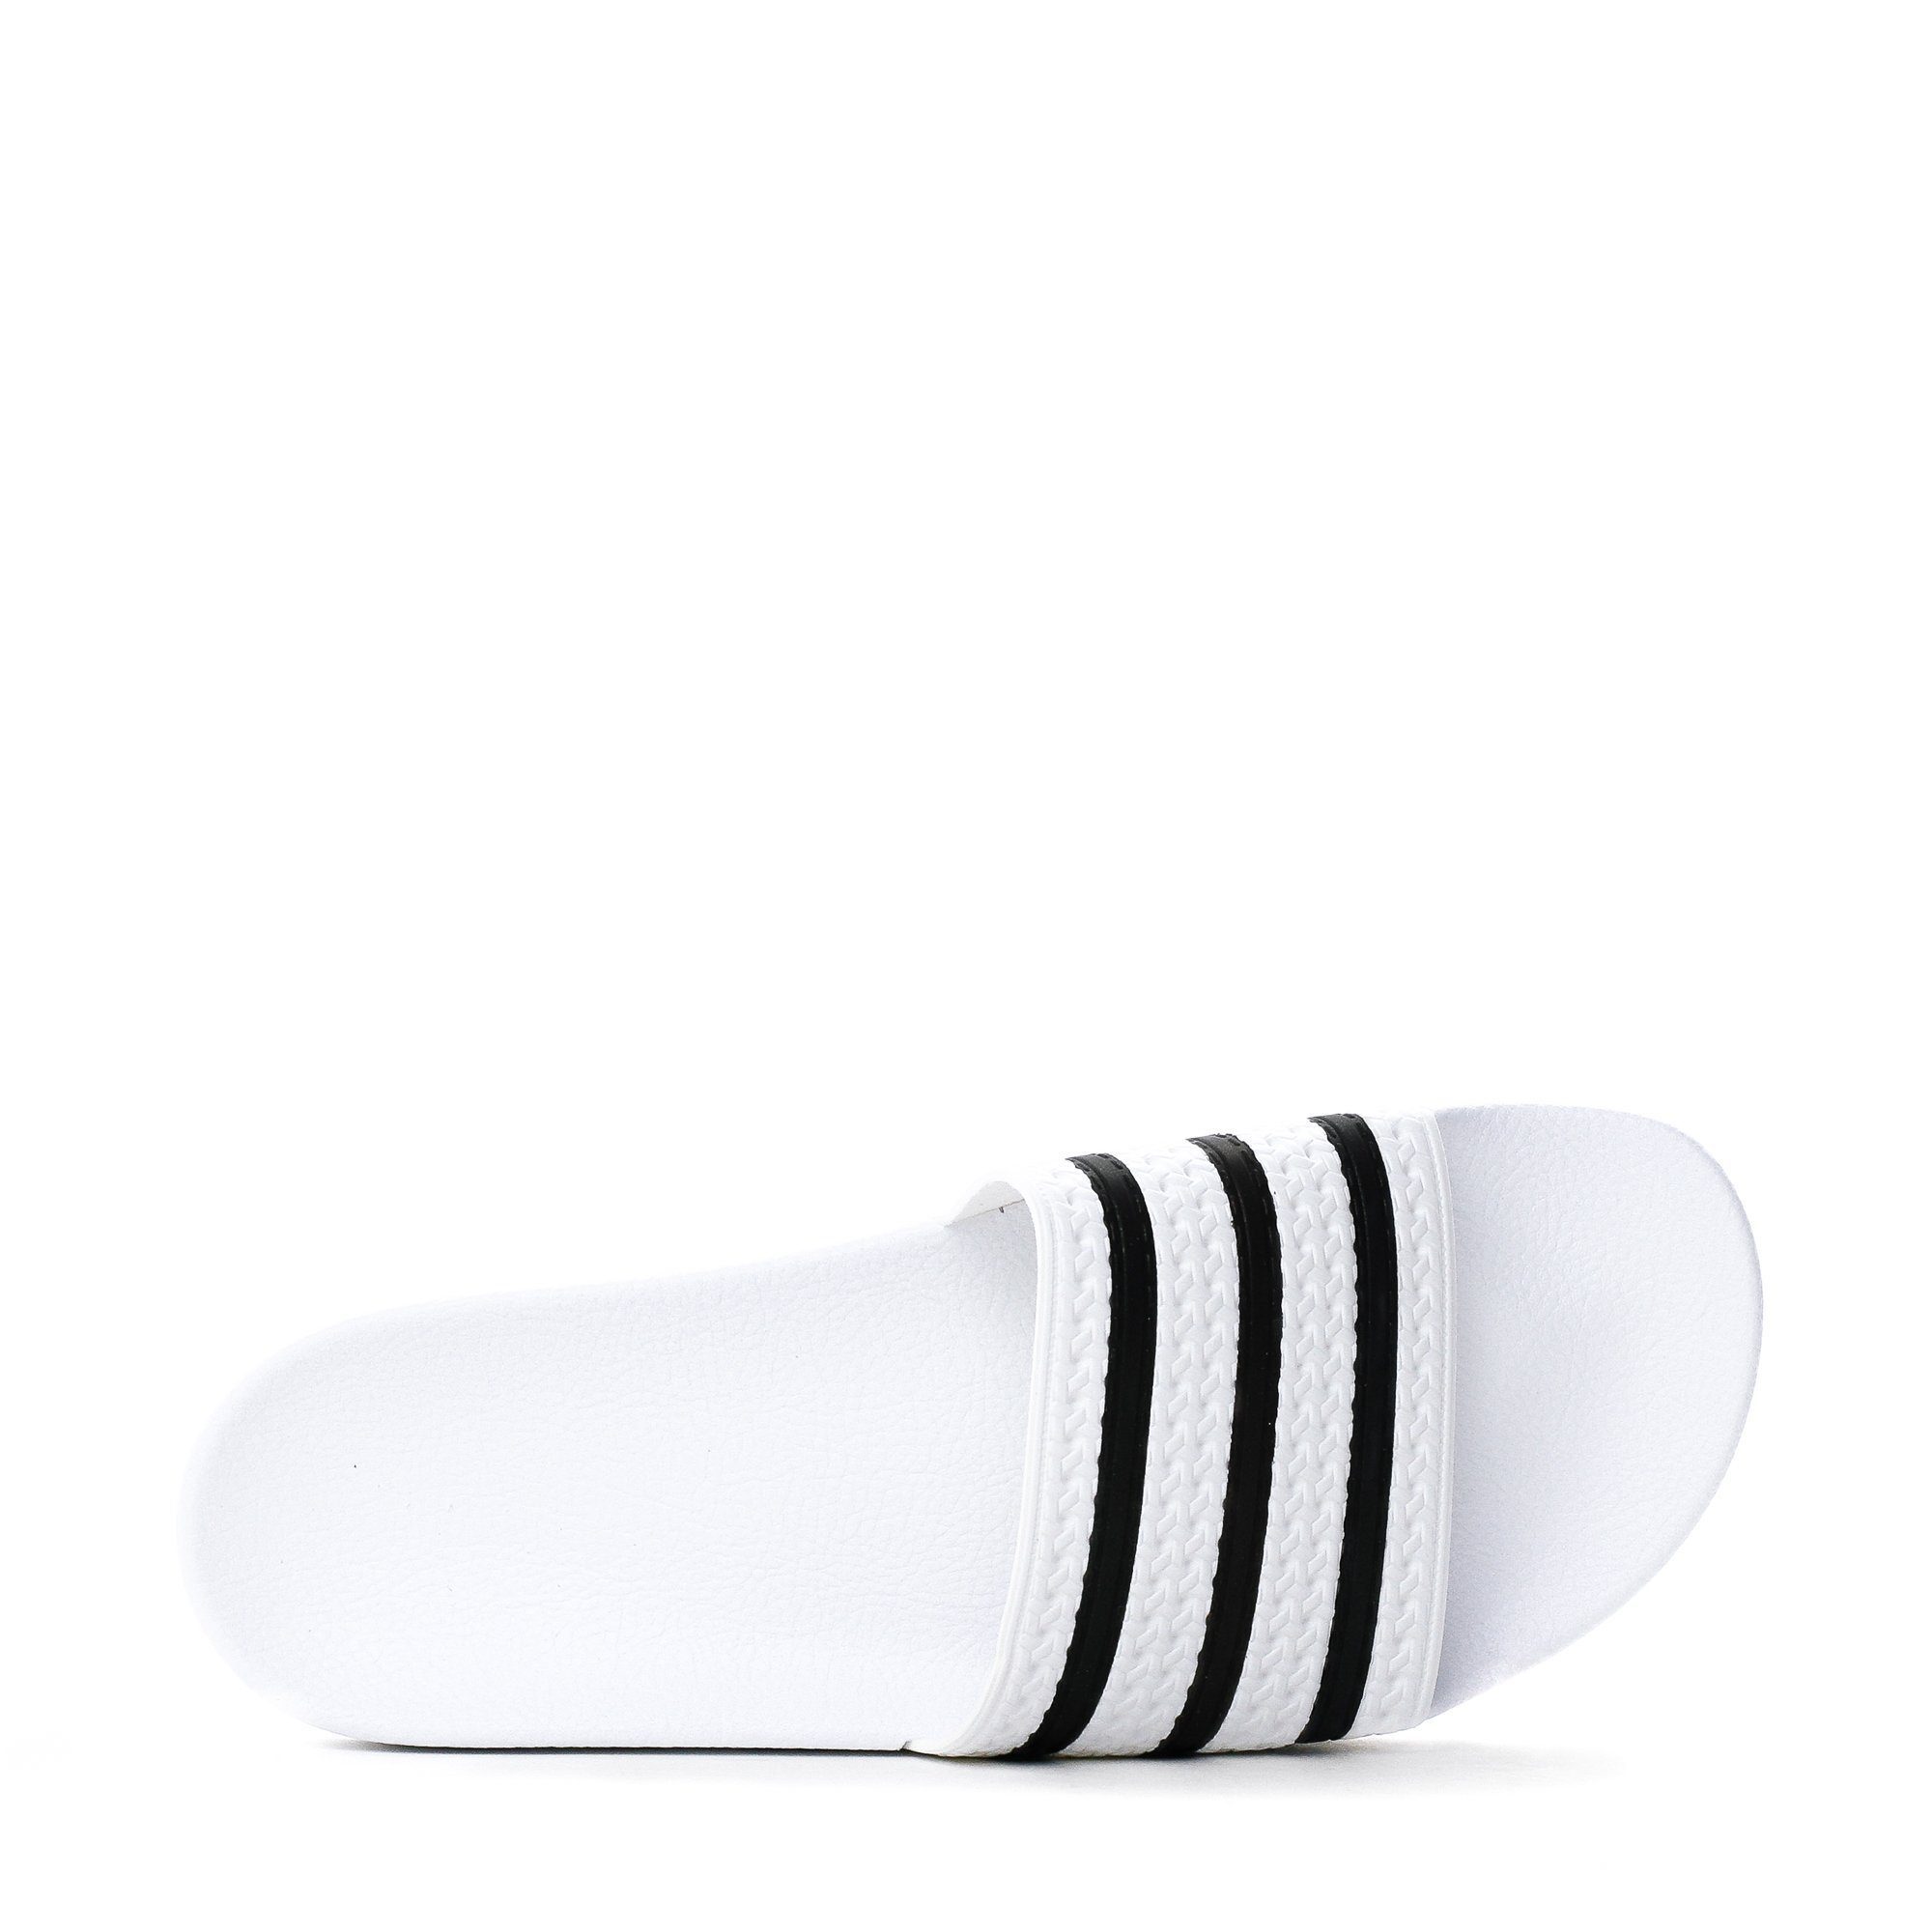 sector Generalizar Con rapidez AspennigeriaShops - country Adidas Originals Adilette White Black Slides  Made In Italy 280648 (Fast shipping) - country adidas coupons honey free  shipping promo code